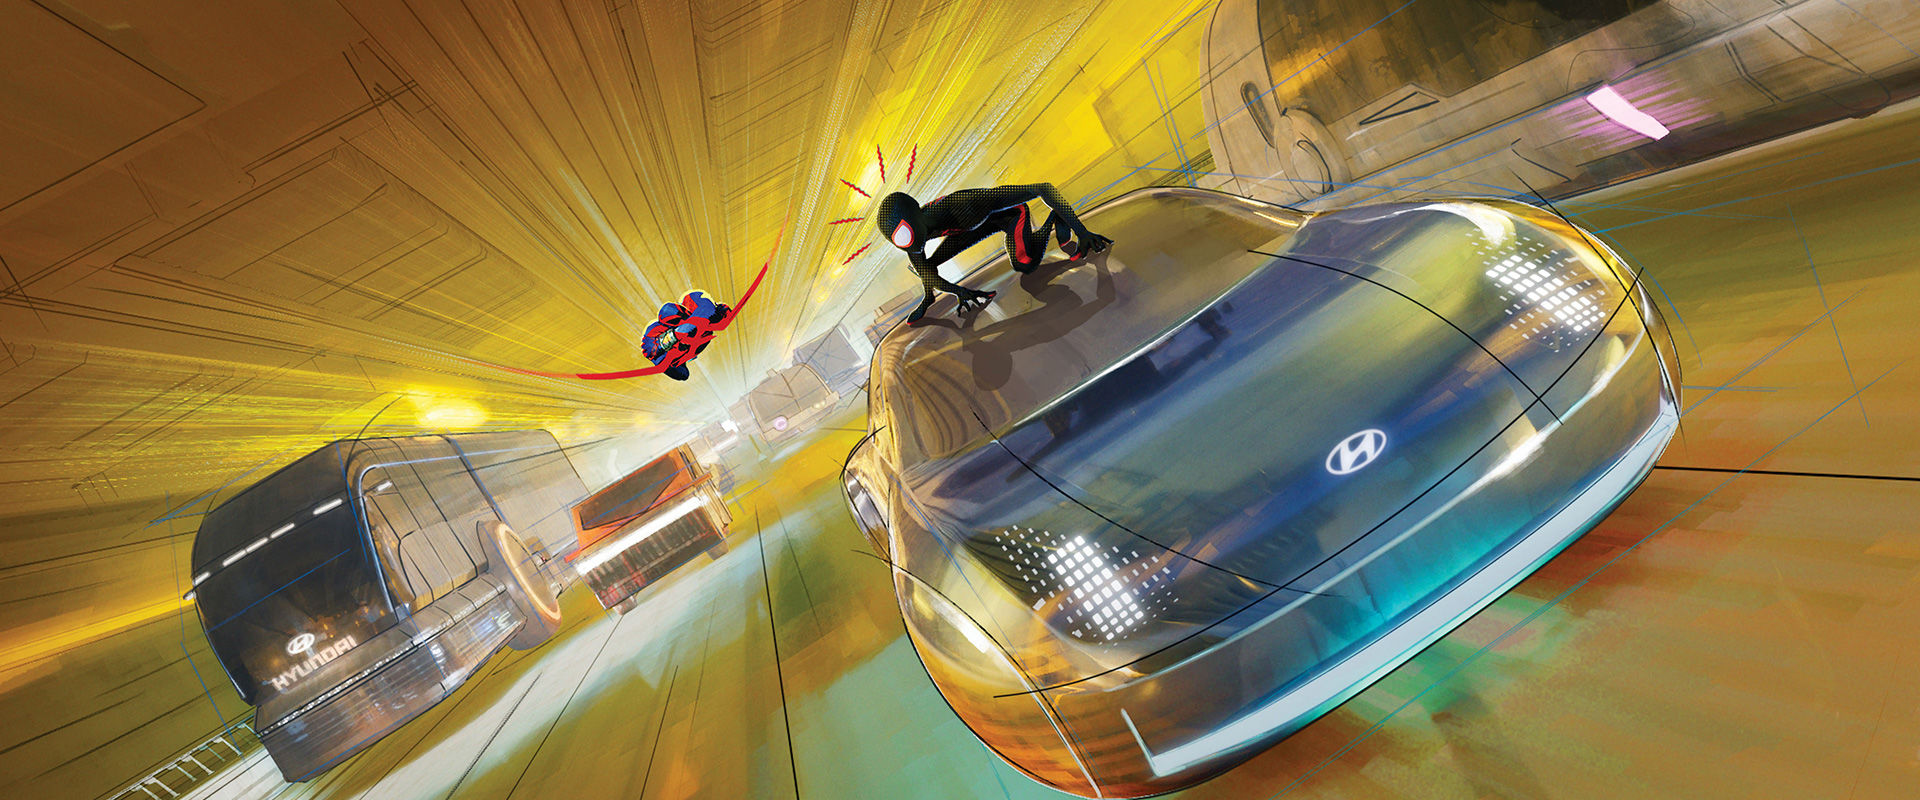 Hyundai Motor Company and Sony Pictures are joining forces again this summer on SpiderMan Across the SpiderVerse